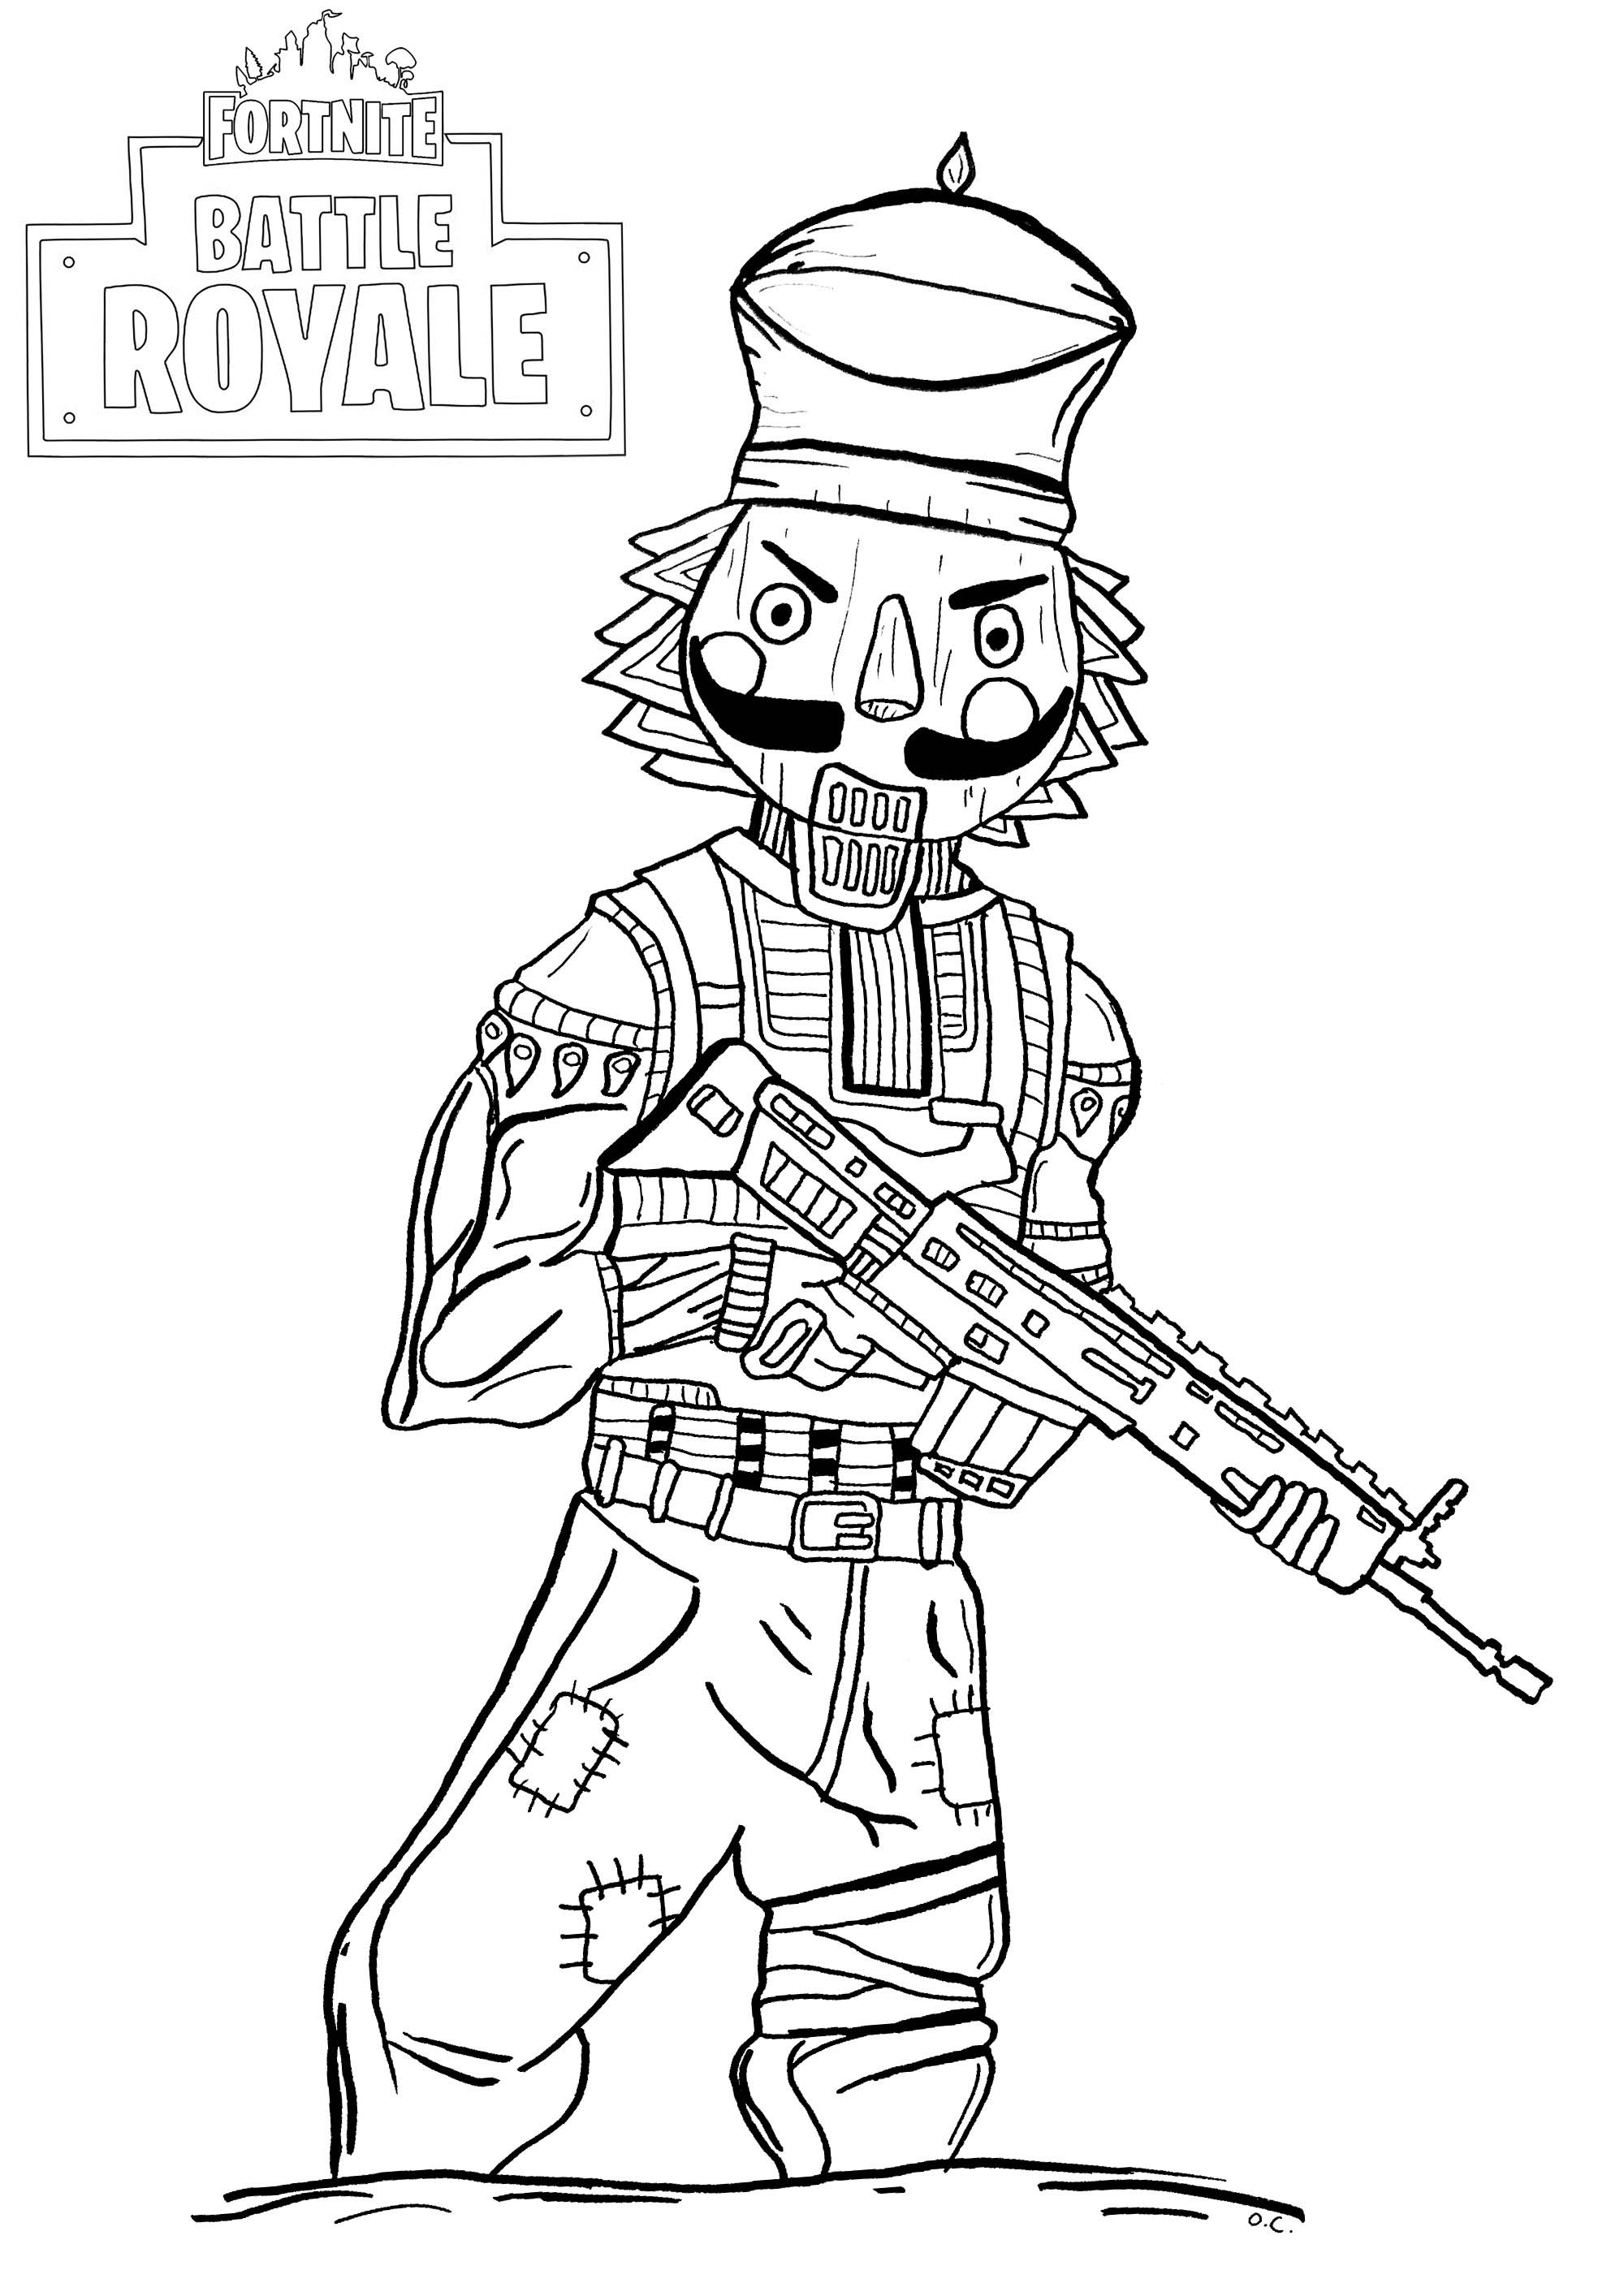 Crackshot : Legendary outfit available in Fortnite Battle Royale during the winter holiday seasons (December-January). It's a red suit with the head of a crazed-looking toy soldier. exclusive 'fan-art' drawing.